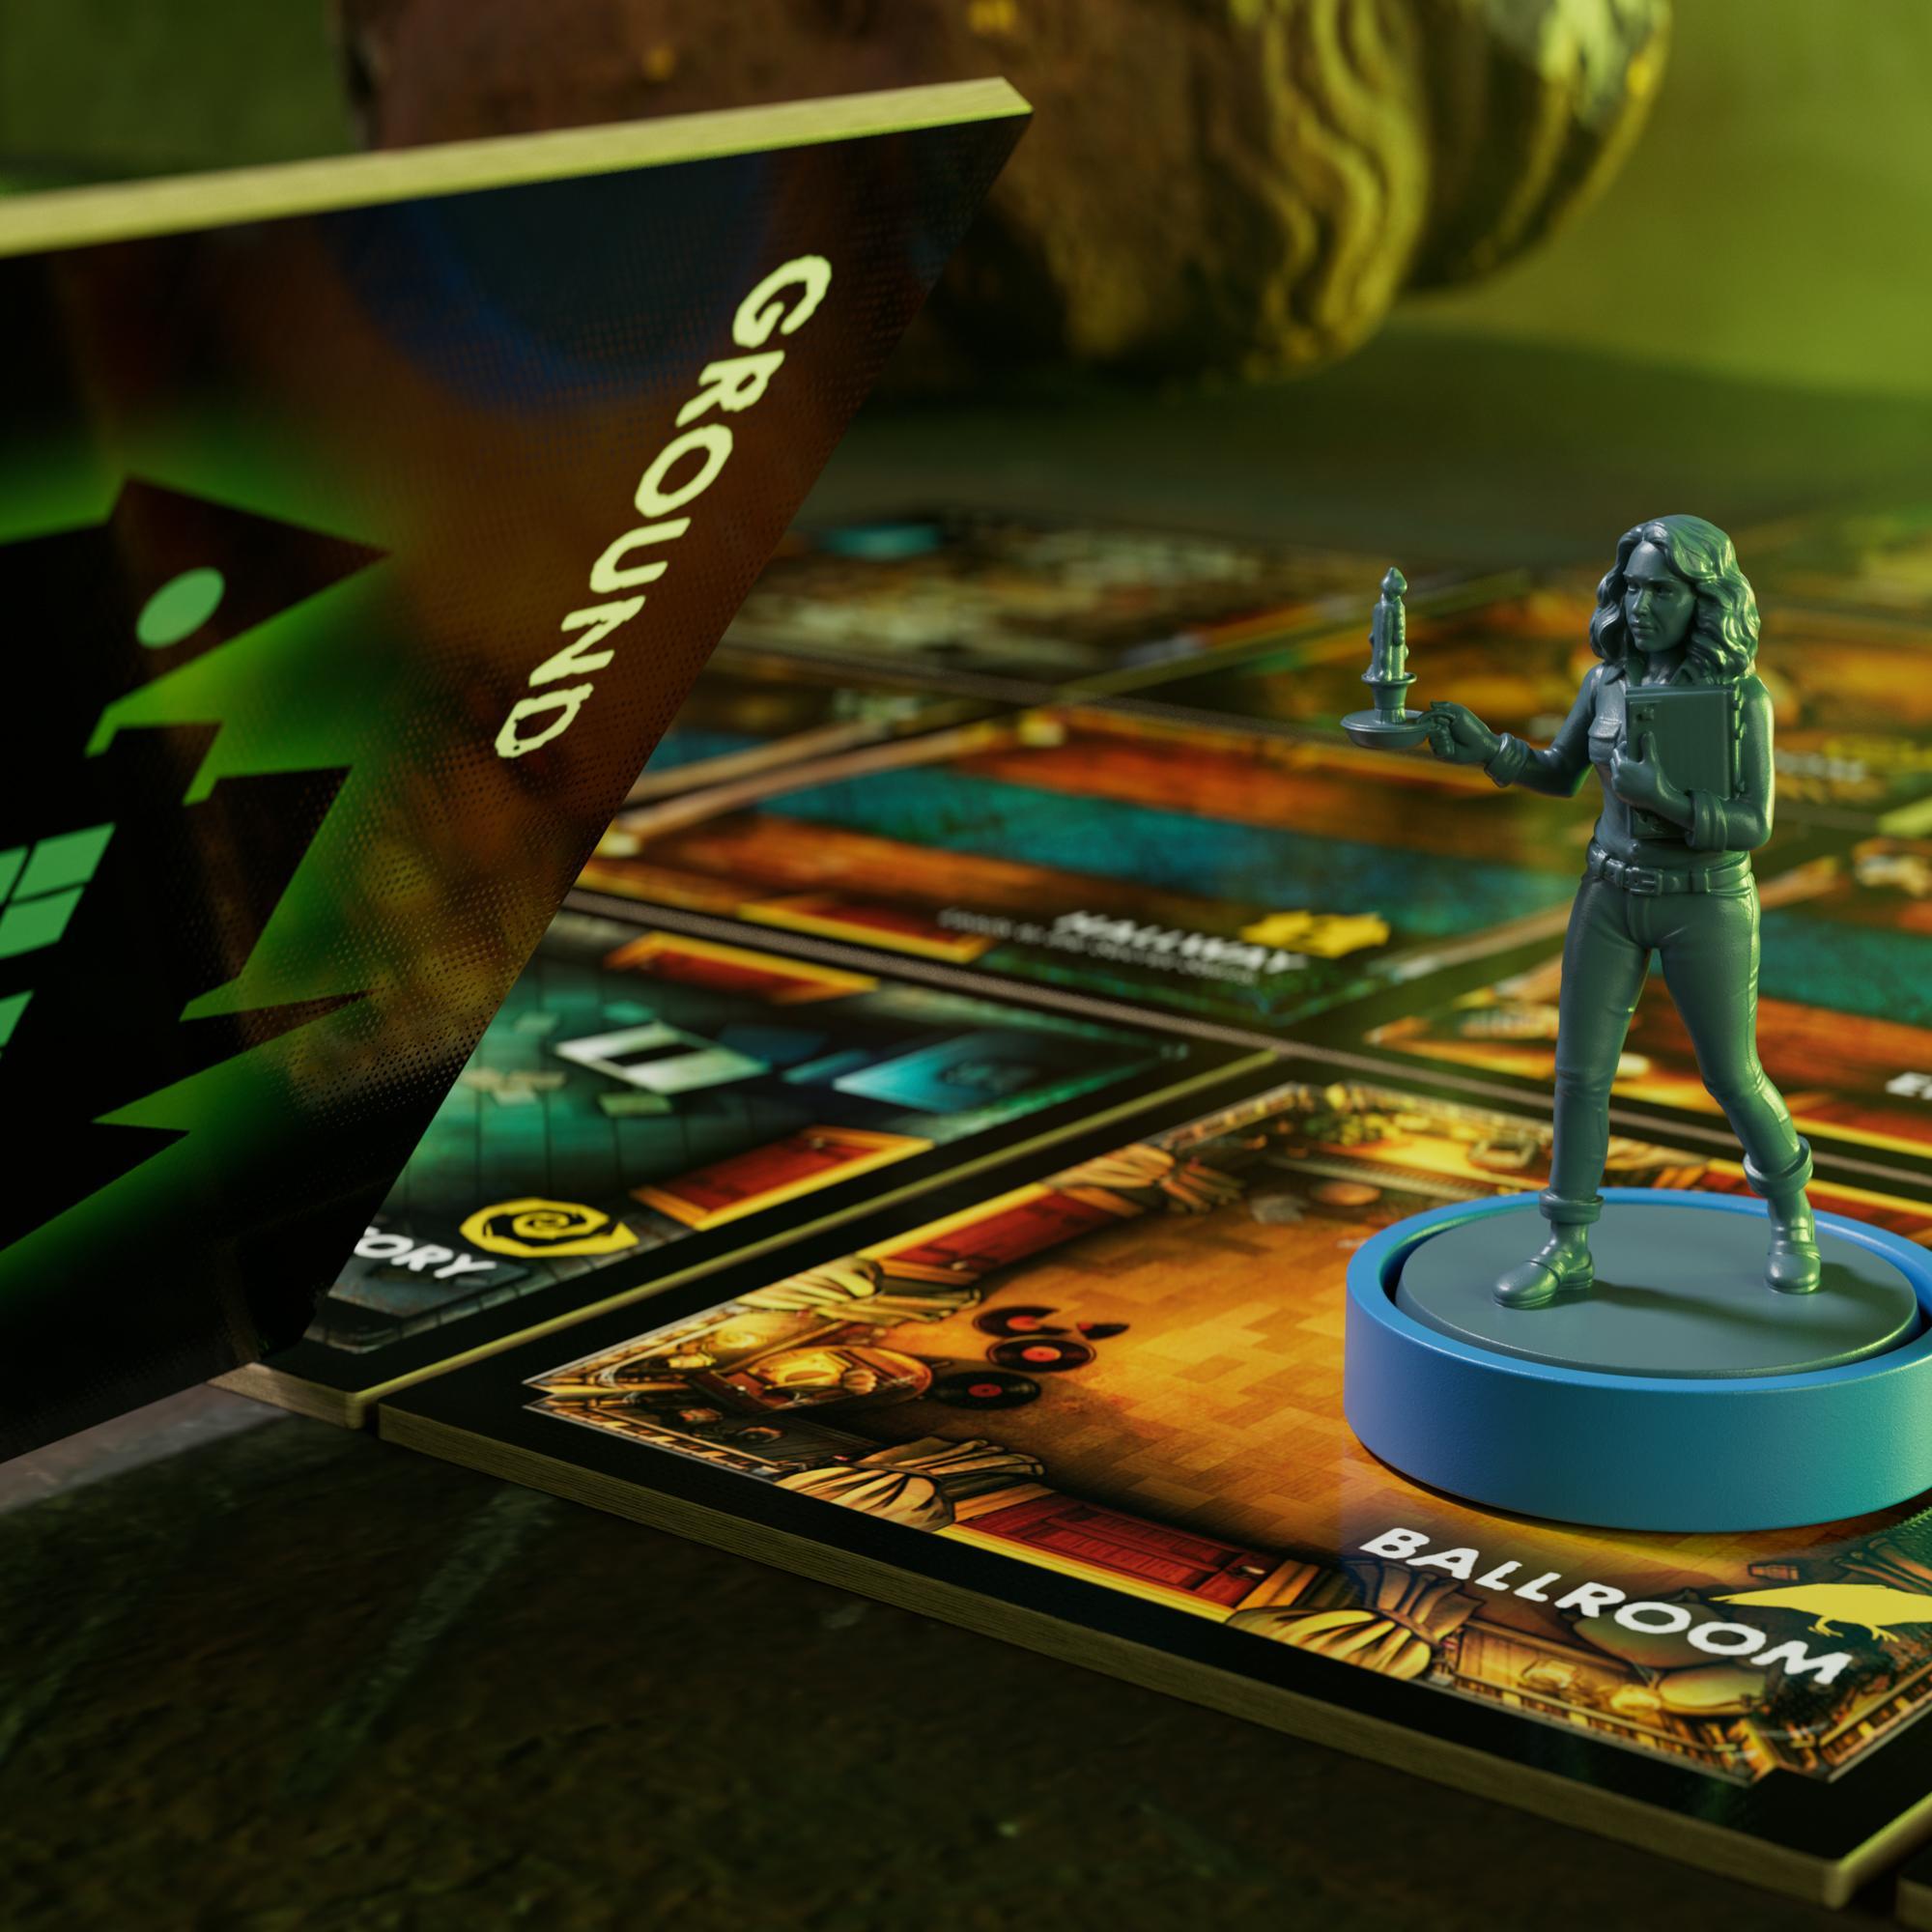 Avalon Hill, Betrayal at House on the Hill product thumbnail 1